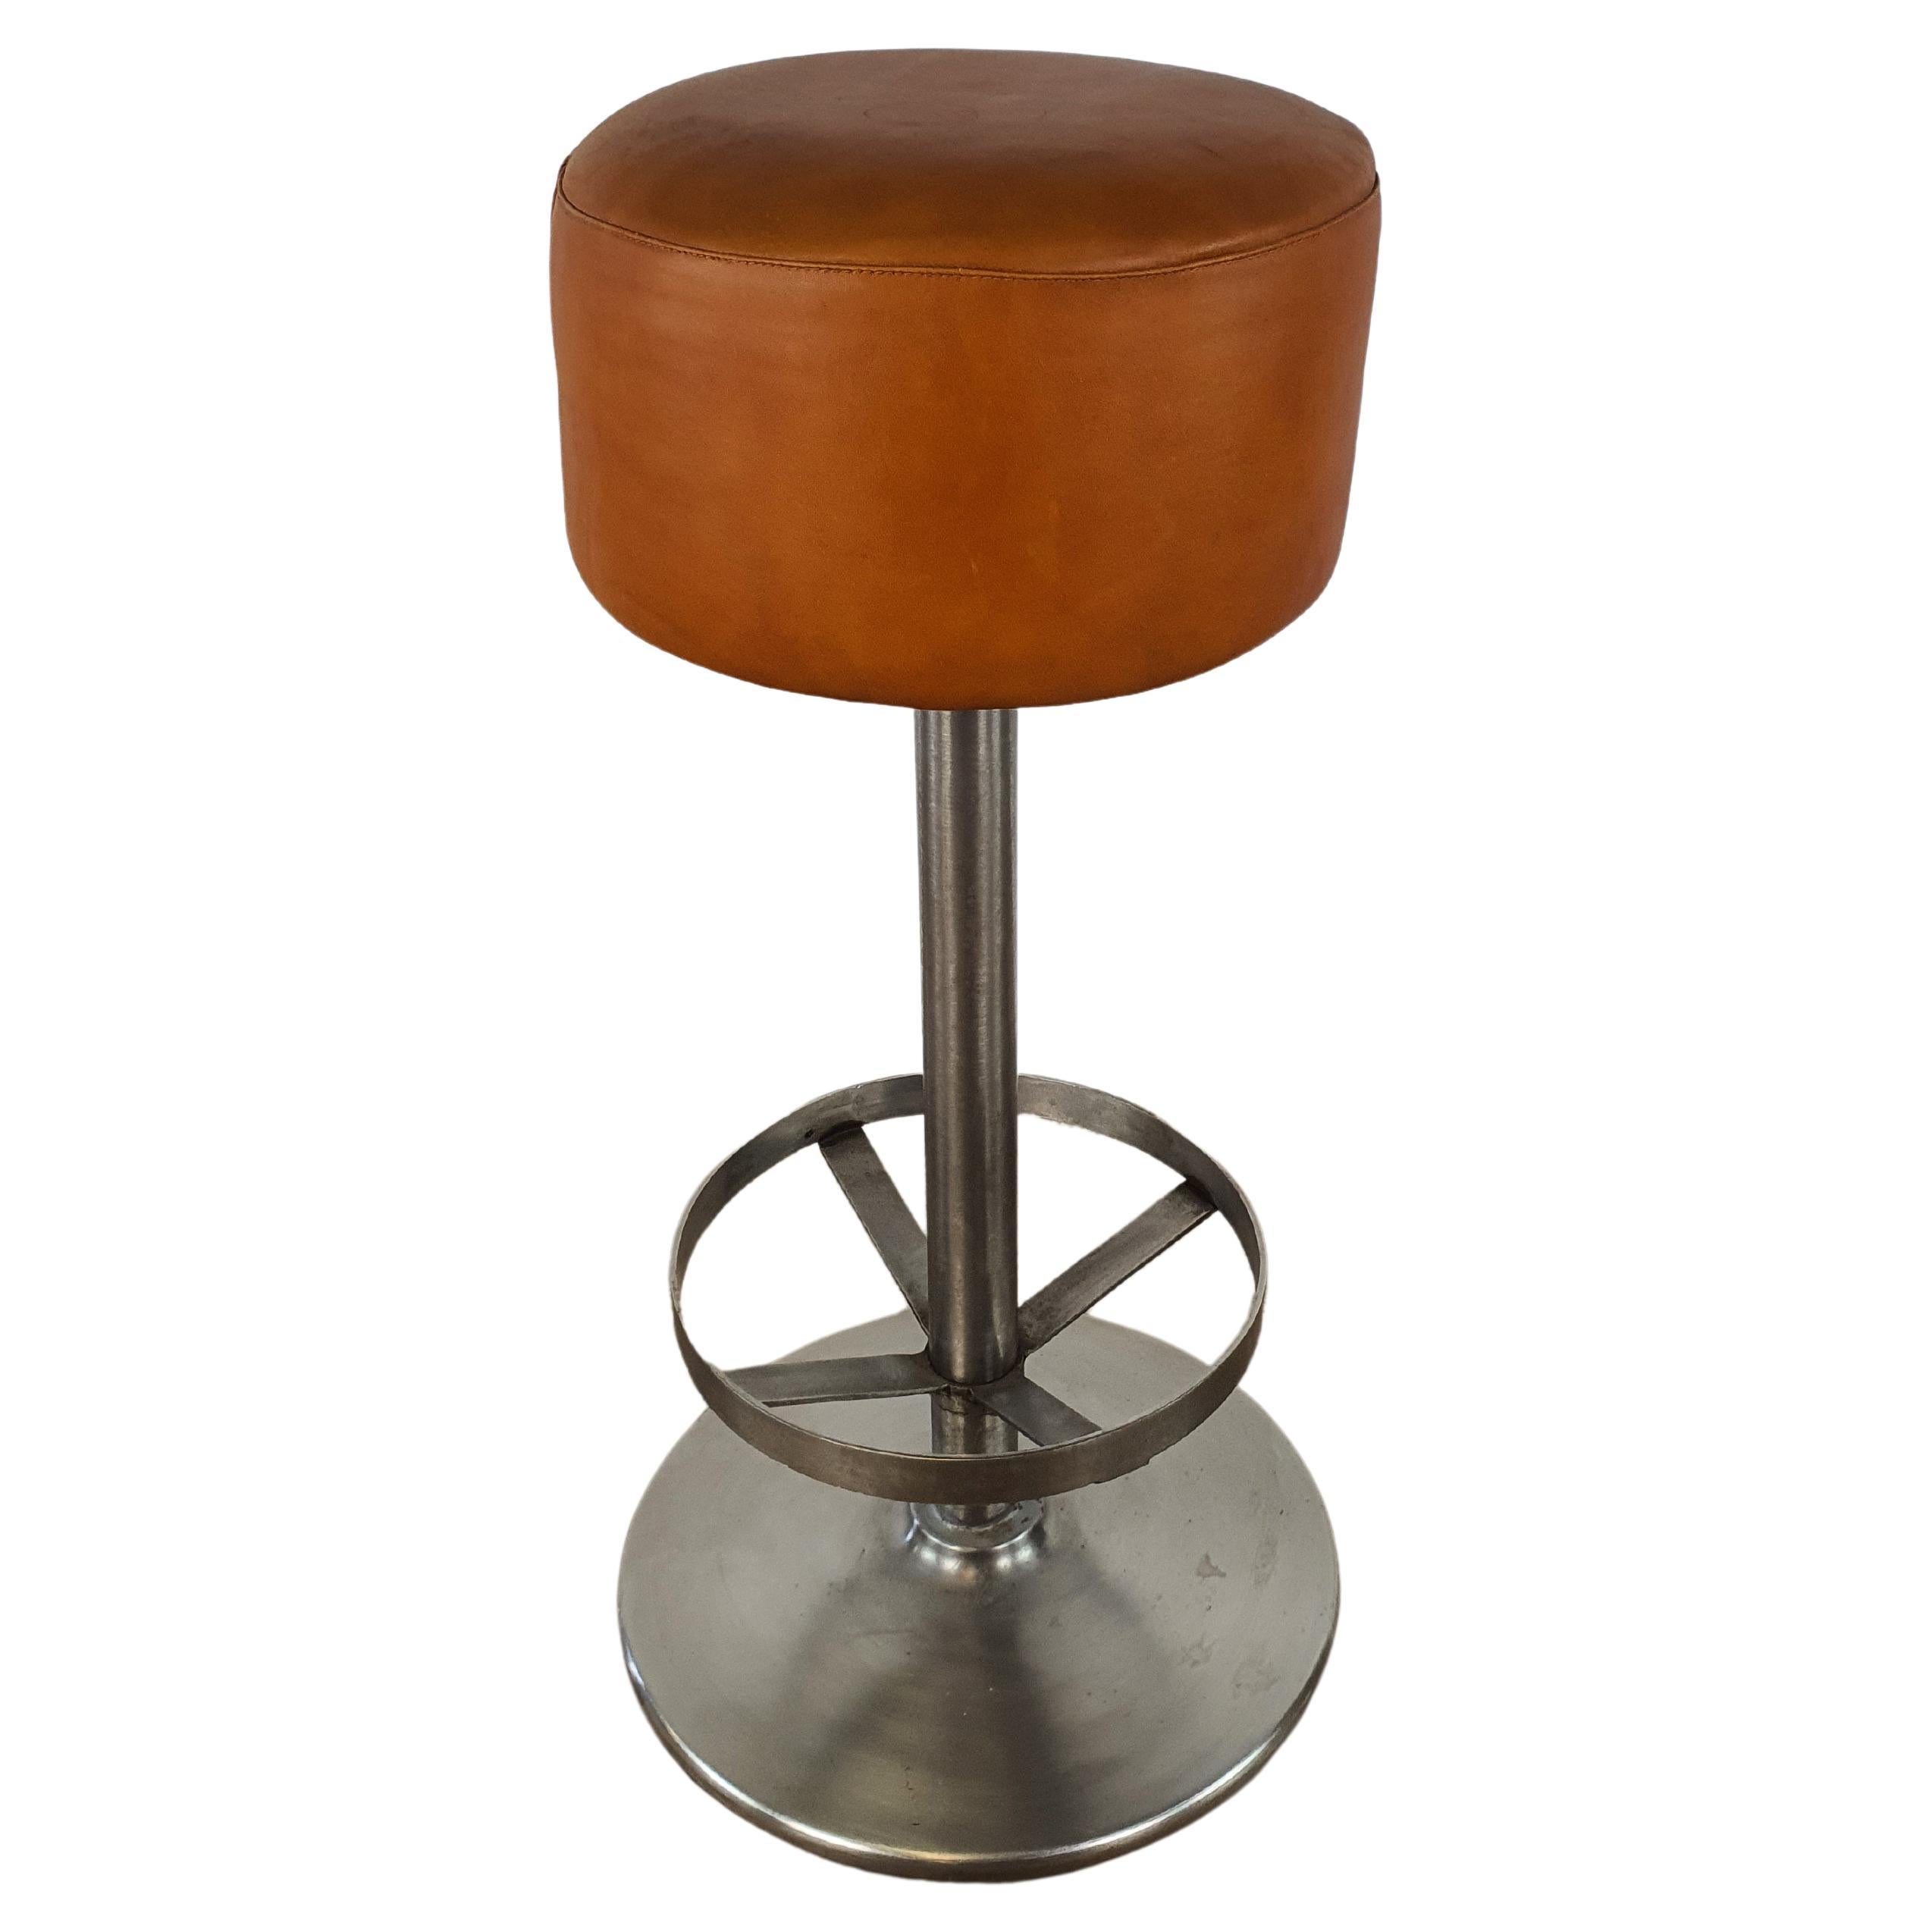 Metal Stool with Orange Leather Seat from 1990s